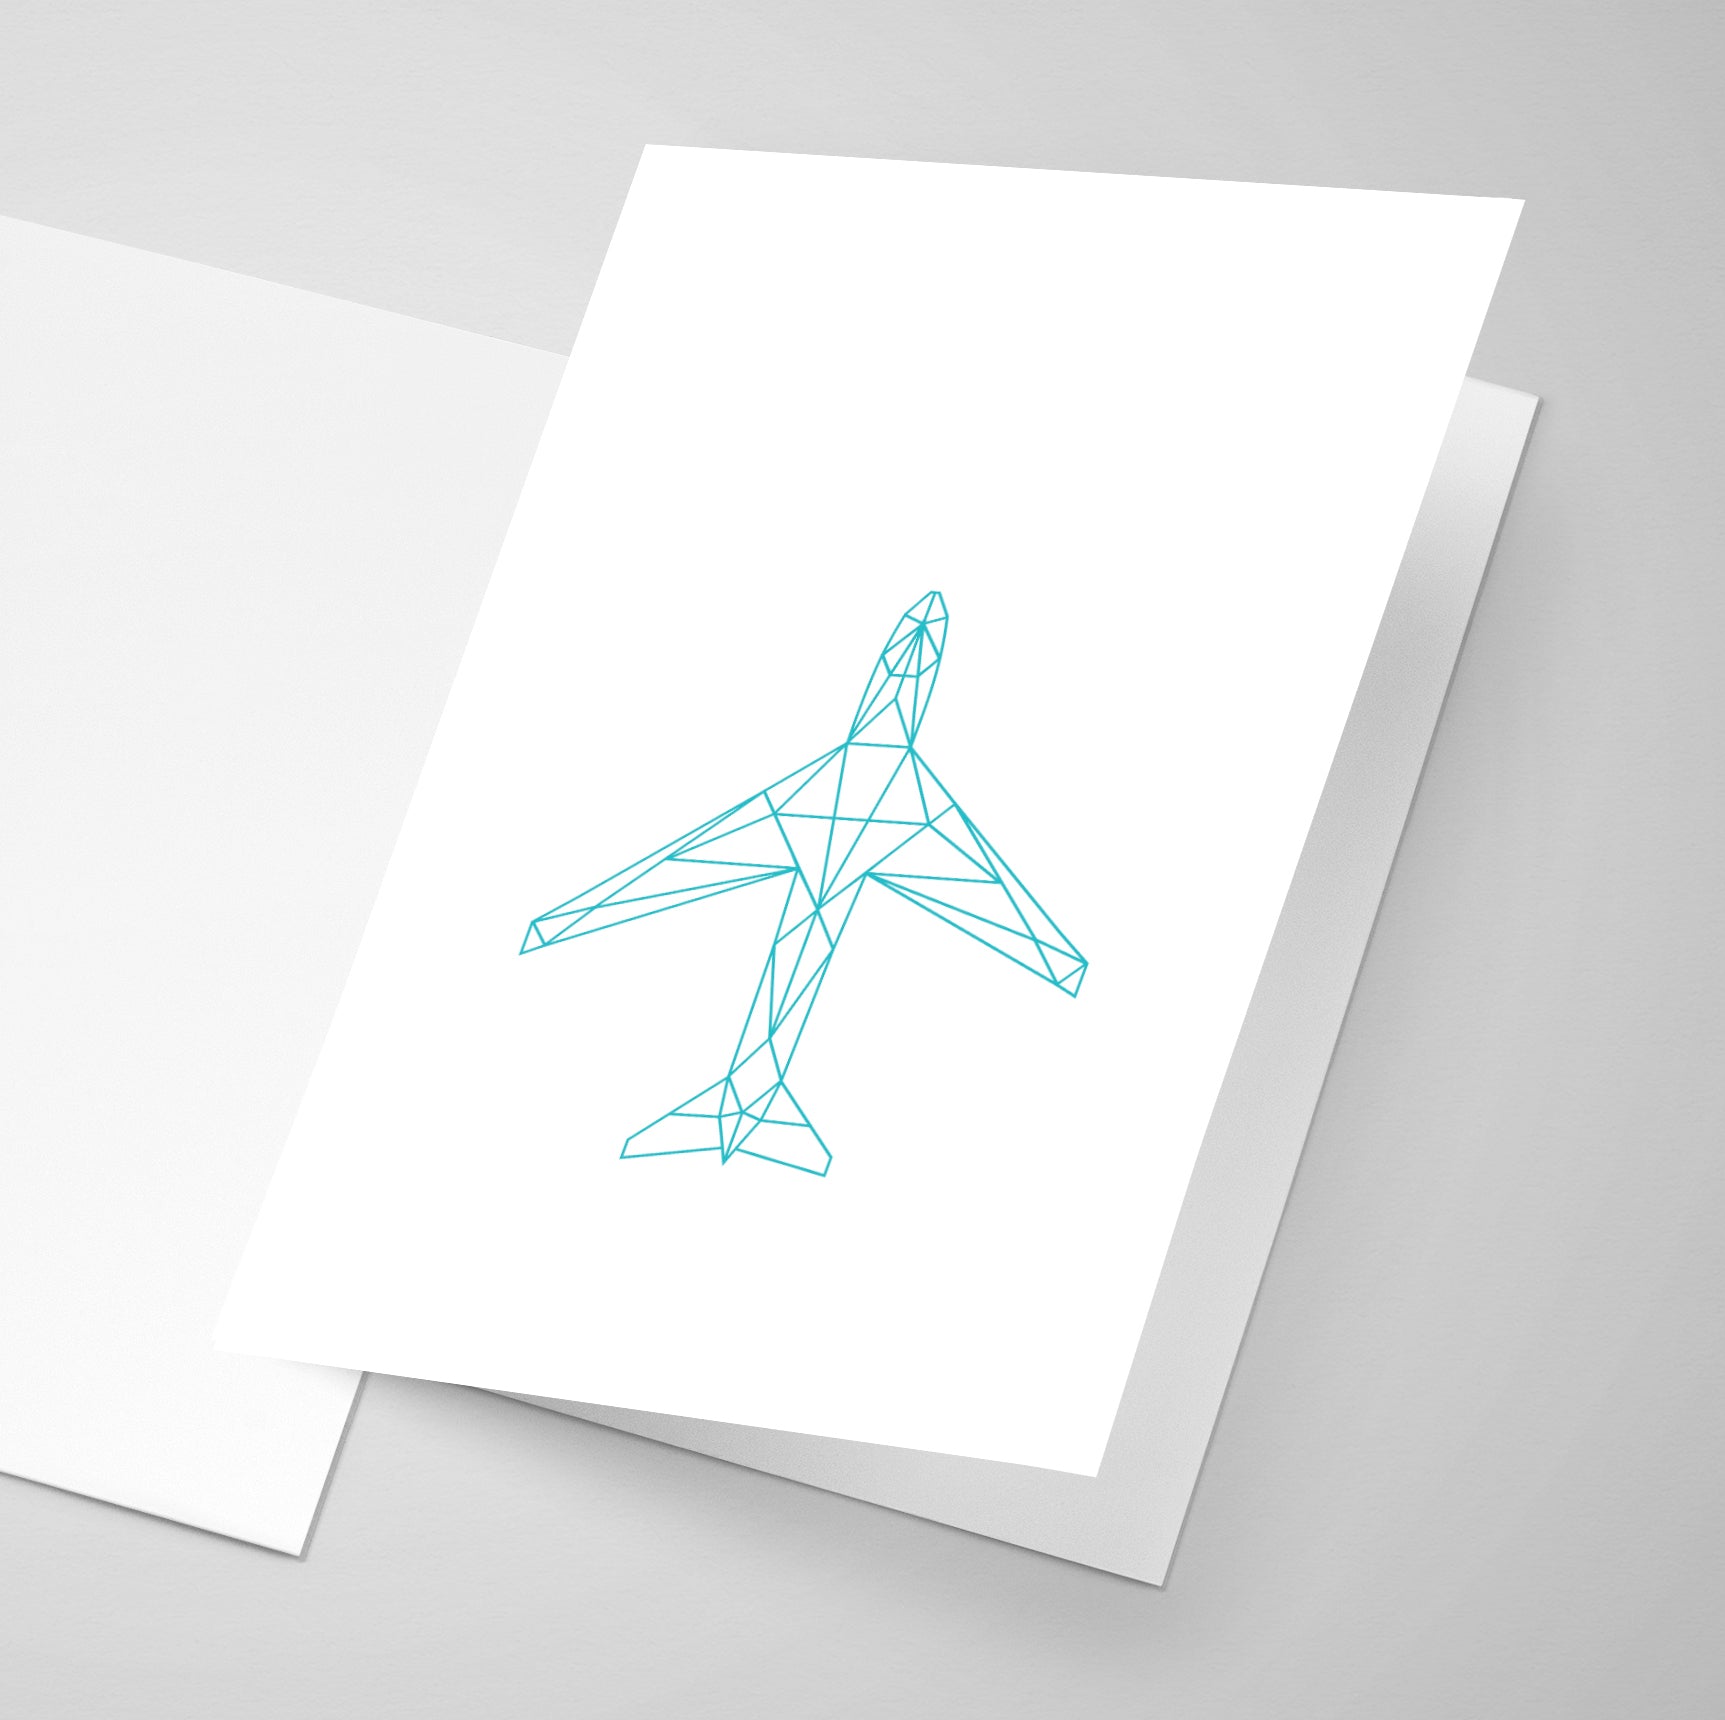 A geometric styled printed aircraft on a greeting card.